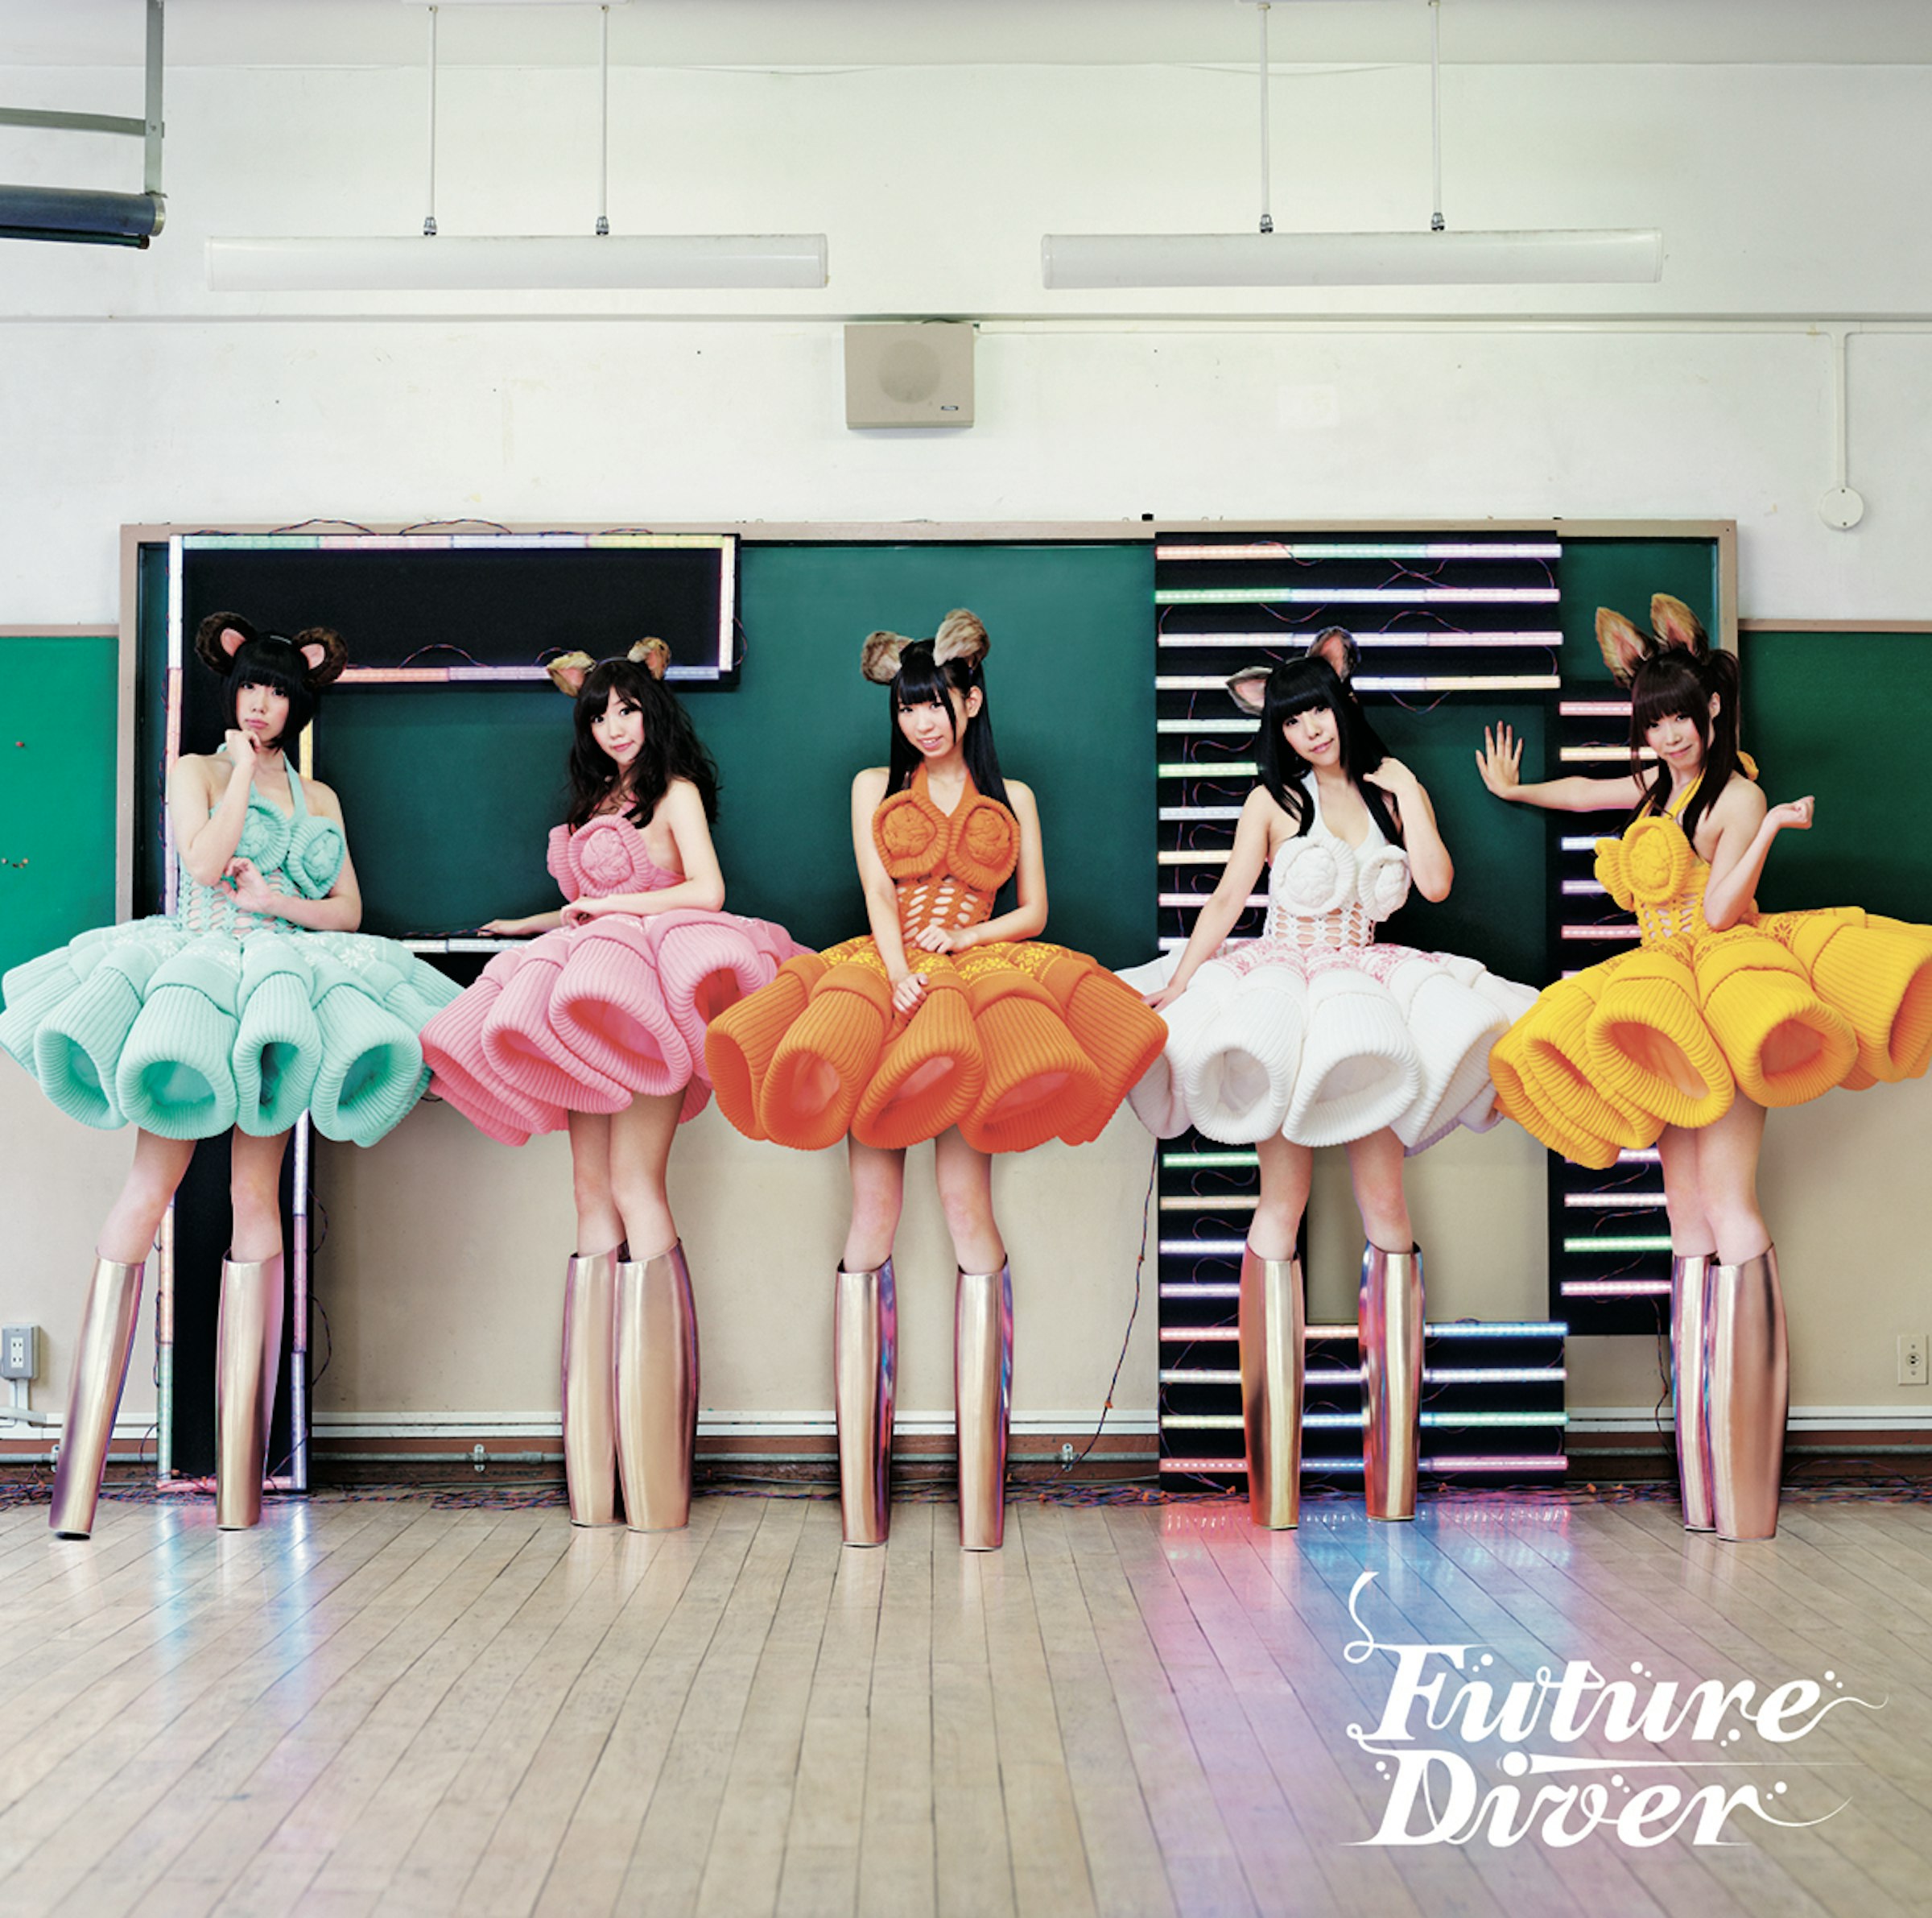 Dempagumi.inc wore 'MIKIO SAKABE' designed costumes for their major debut song "Future Diver" jacket photo (2011)